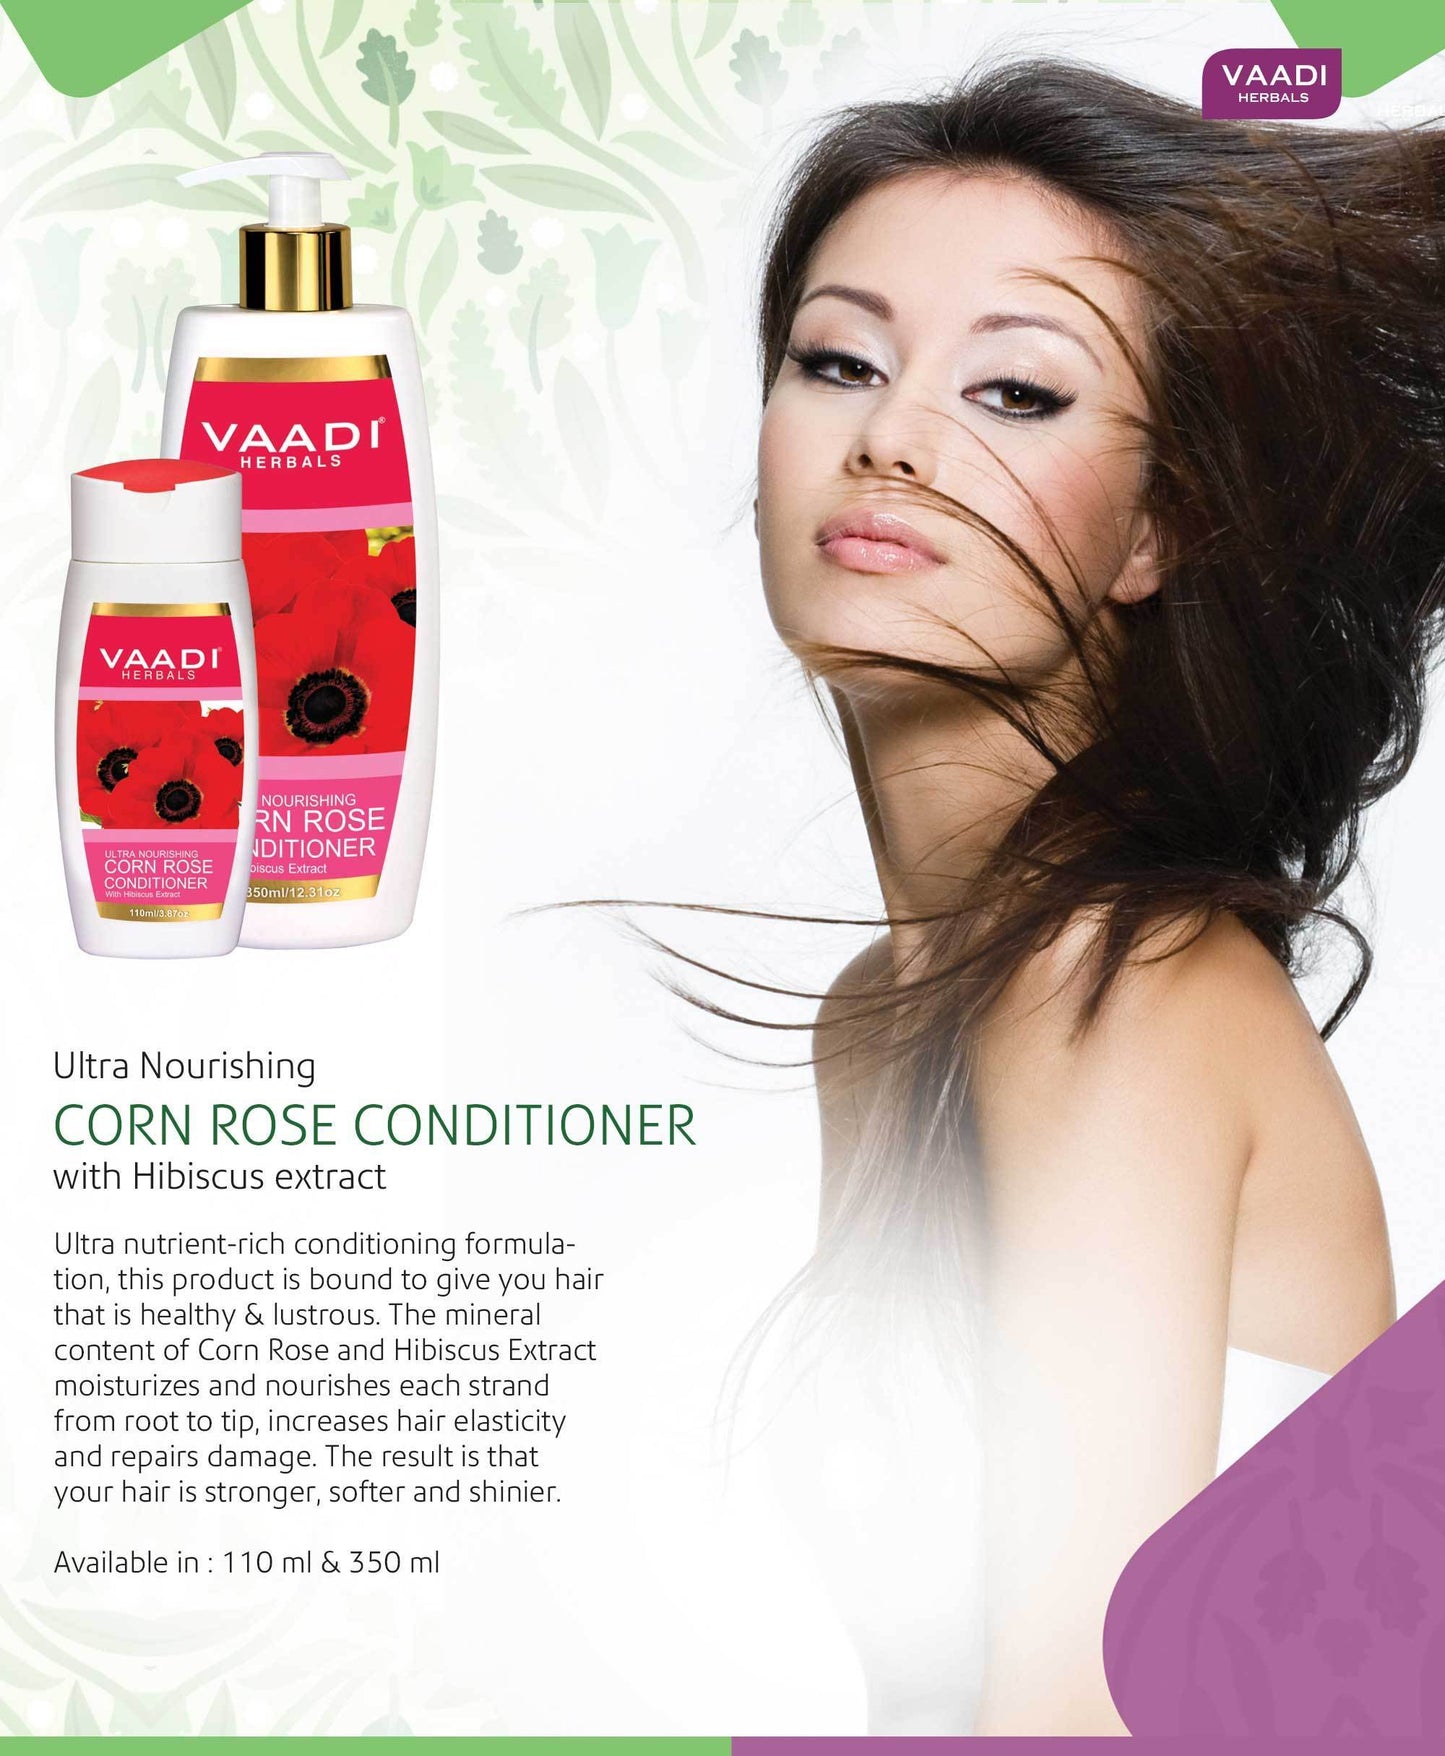 Ultra Nutrient Organic Rich Corn Rose Conditioner with Hibiscus Extract- Conditions & Softens Hair ( 110ml / 4 fl oz)